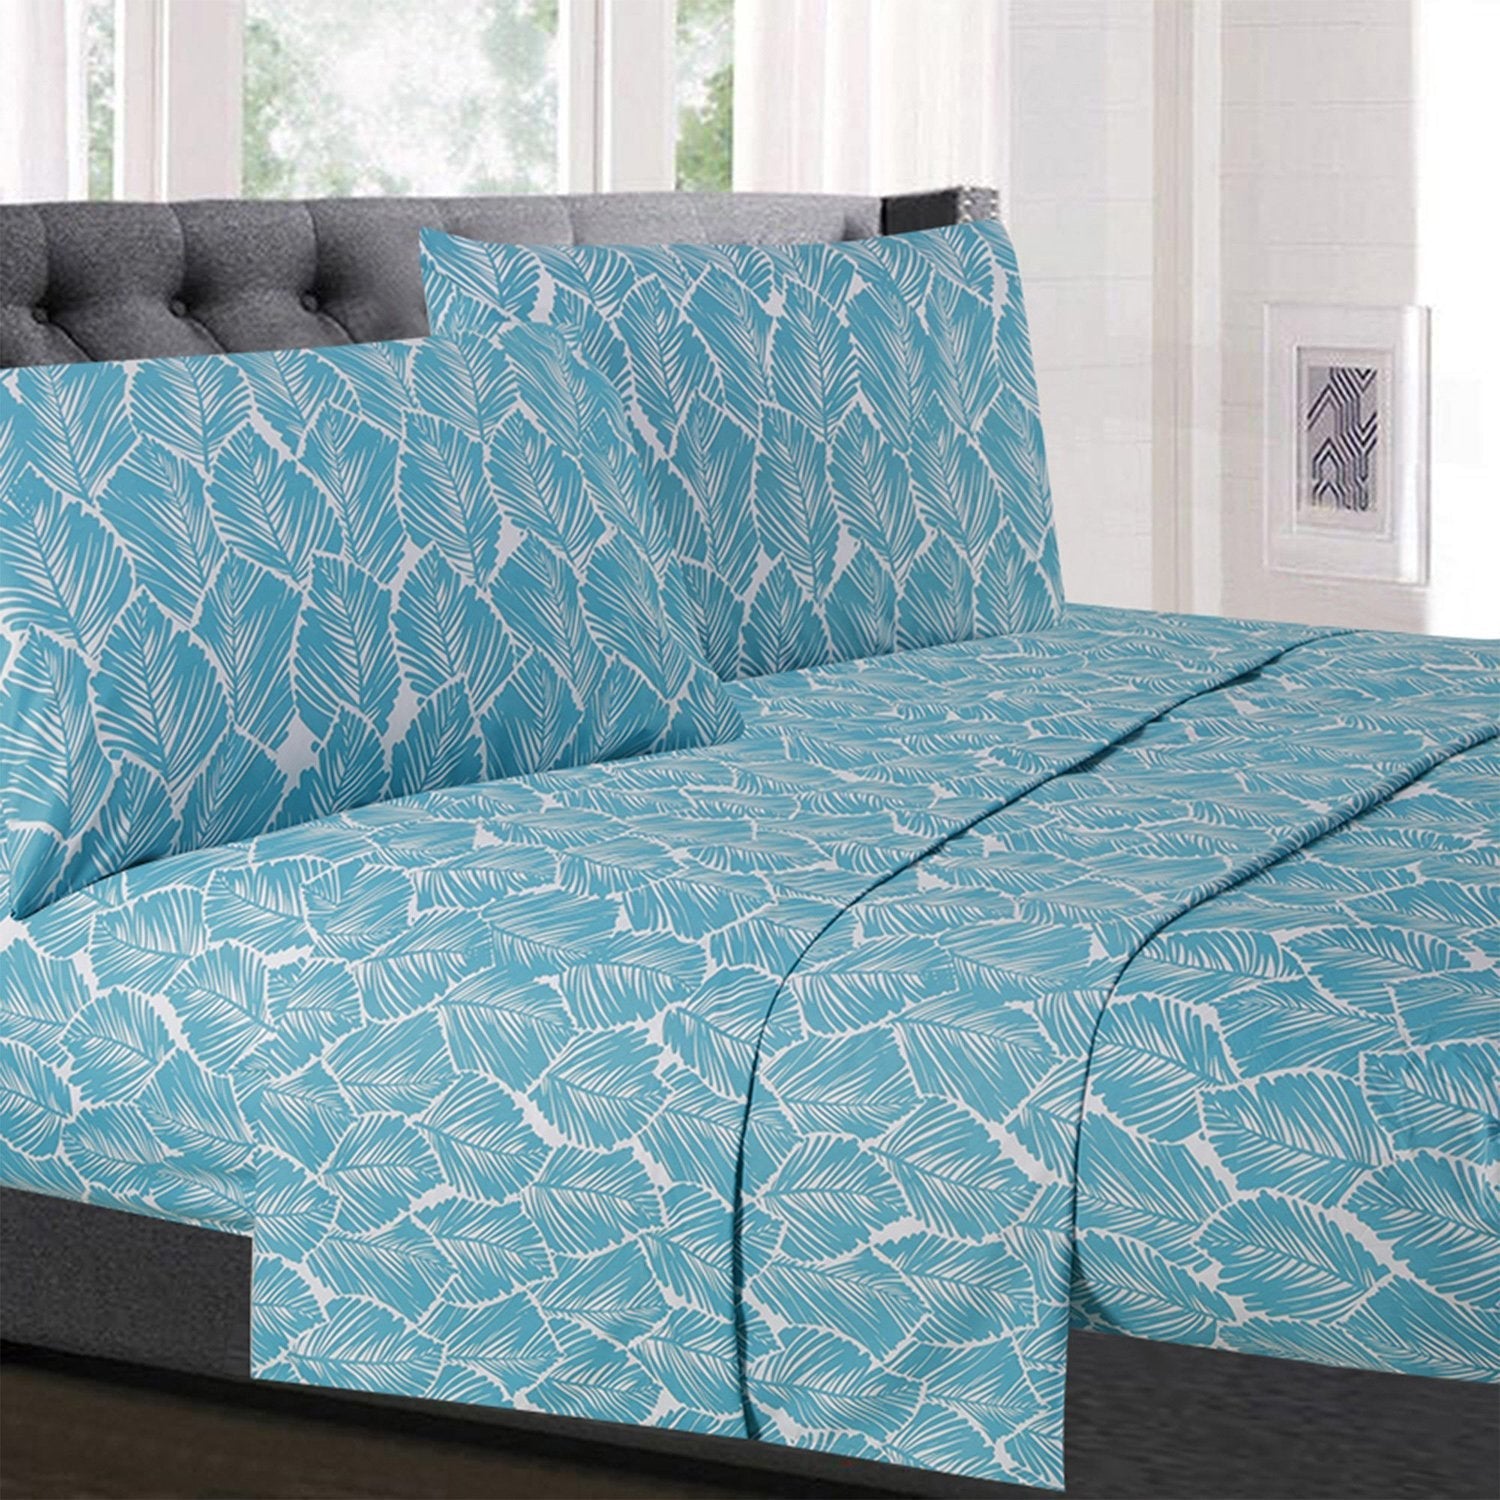 Classic 4-Piece Bed Sheet Set (Tropical Leaf) - Bed